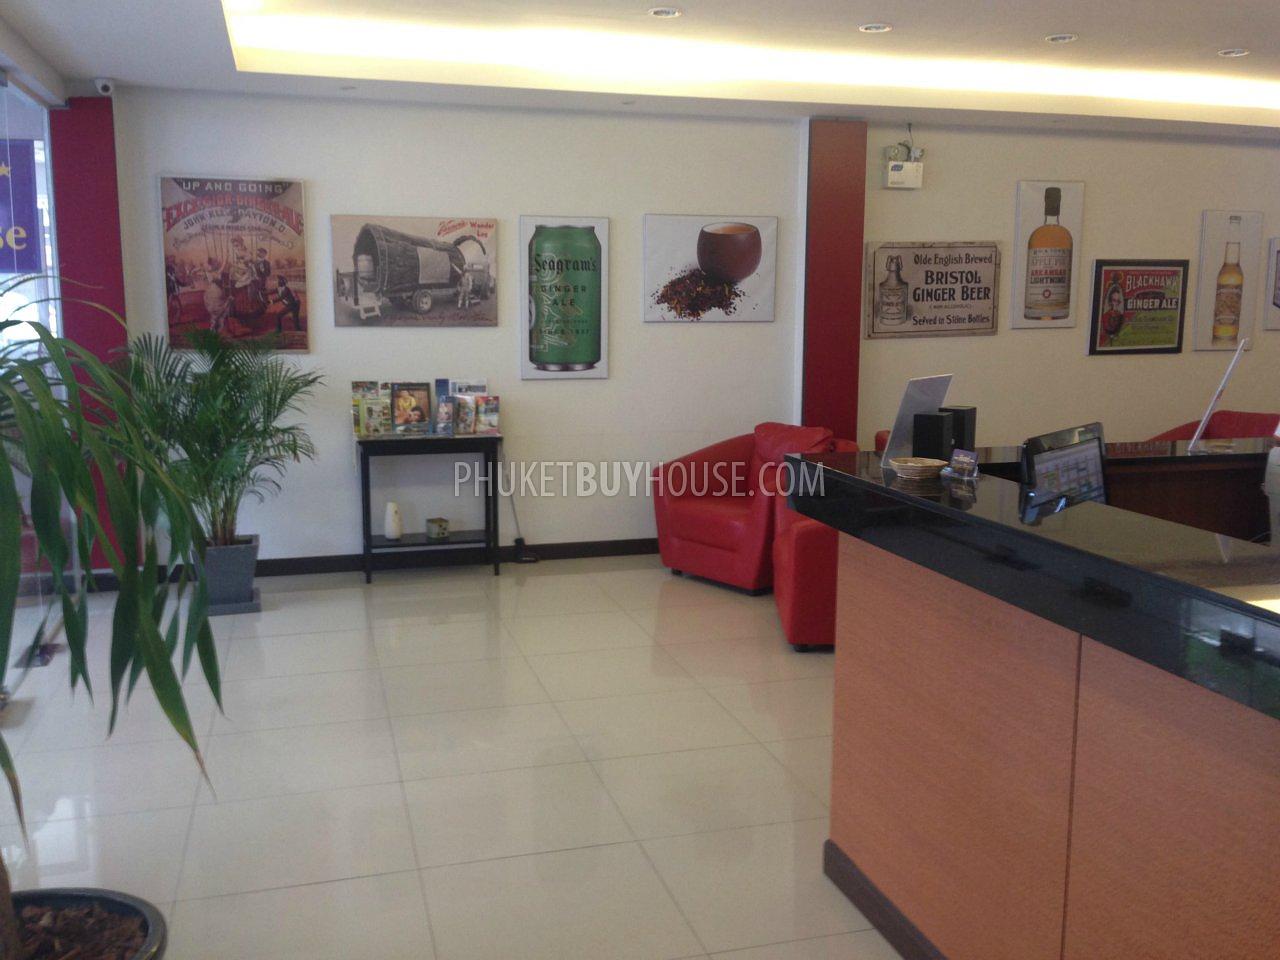 PAT5348: 4-floor Hotel For Sale in the Heart of Patong. Photo #2